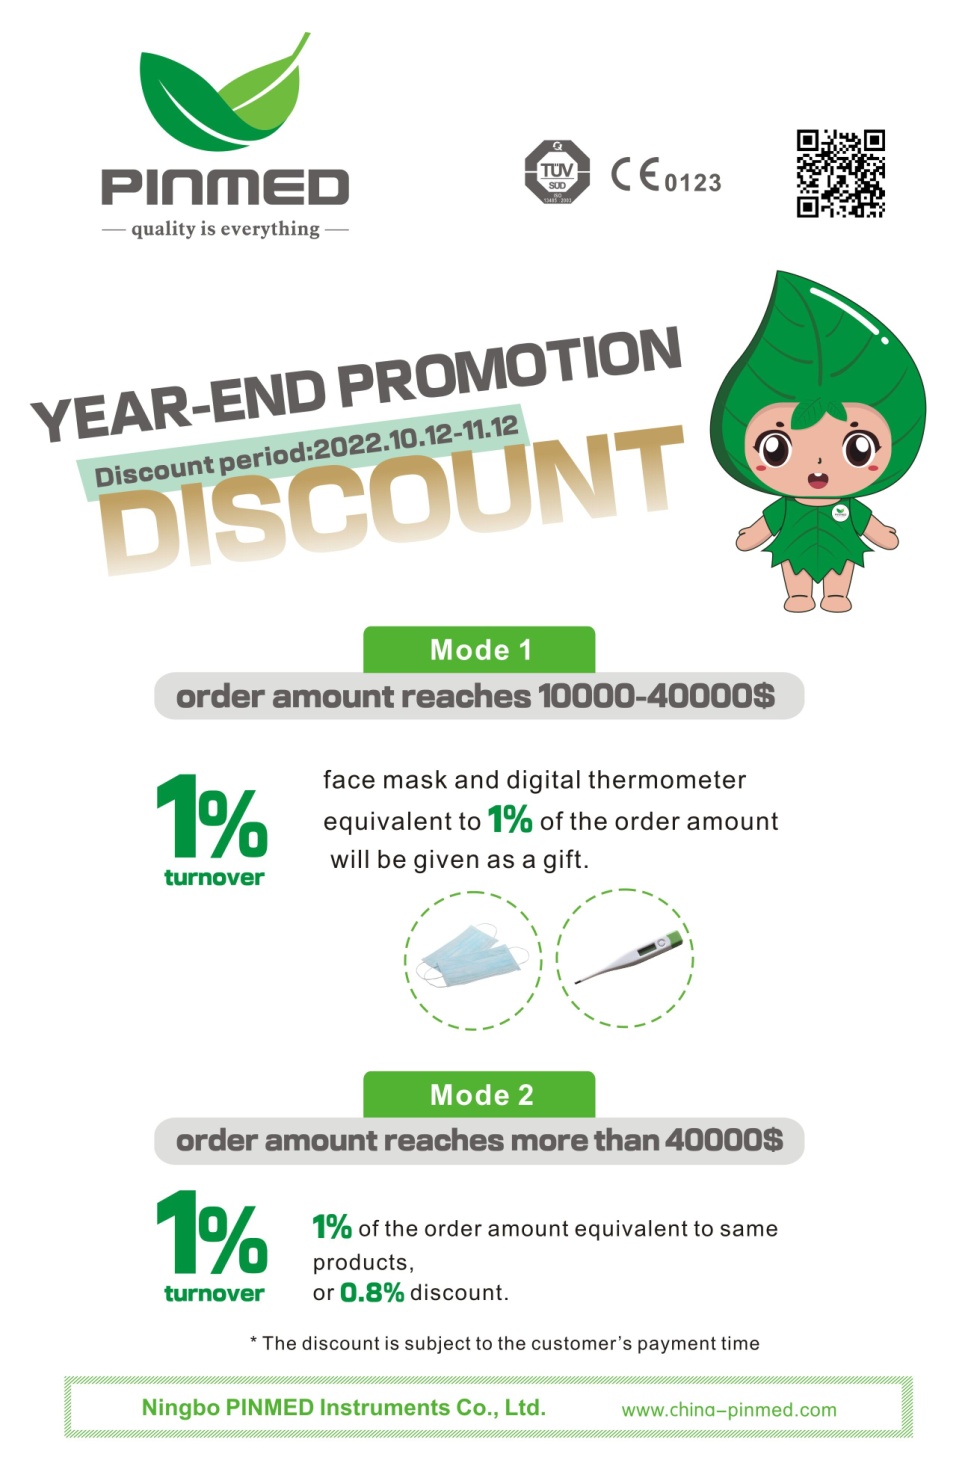 YEAR-END PROMOTION